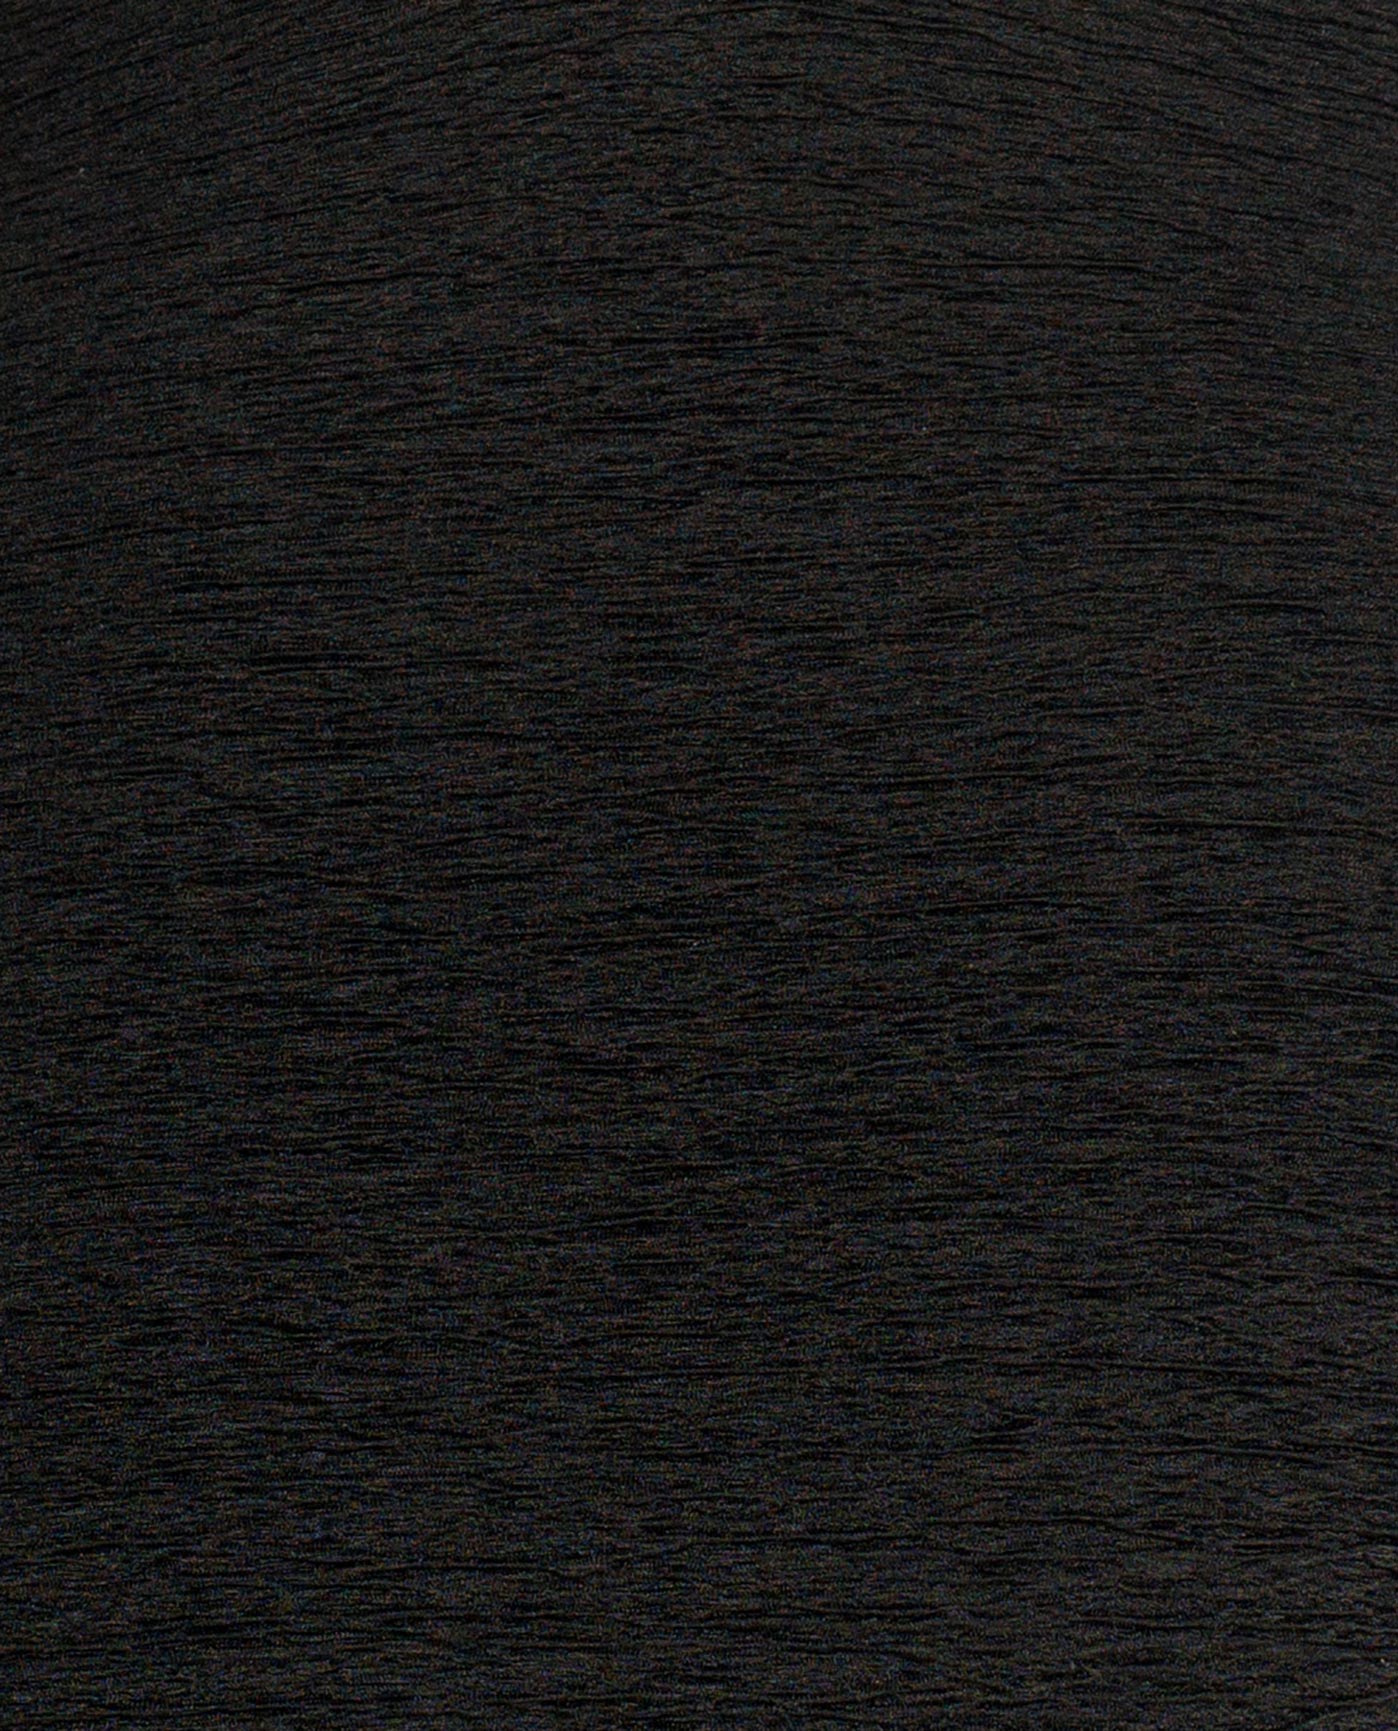 FABRIC SWATCH VIEW OF CHLORINE RESISTANT KRINKLE TEXTURED SOLID CROSS BACK PLUS SIZE ONE PIECE | KRINKLE BLACK 2023